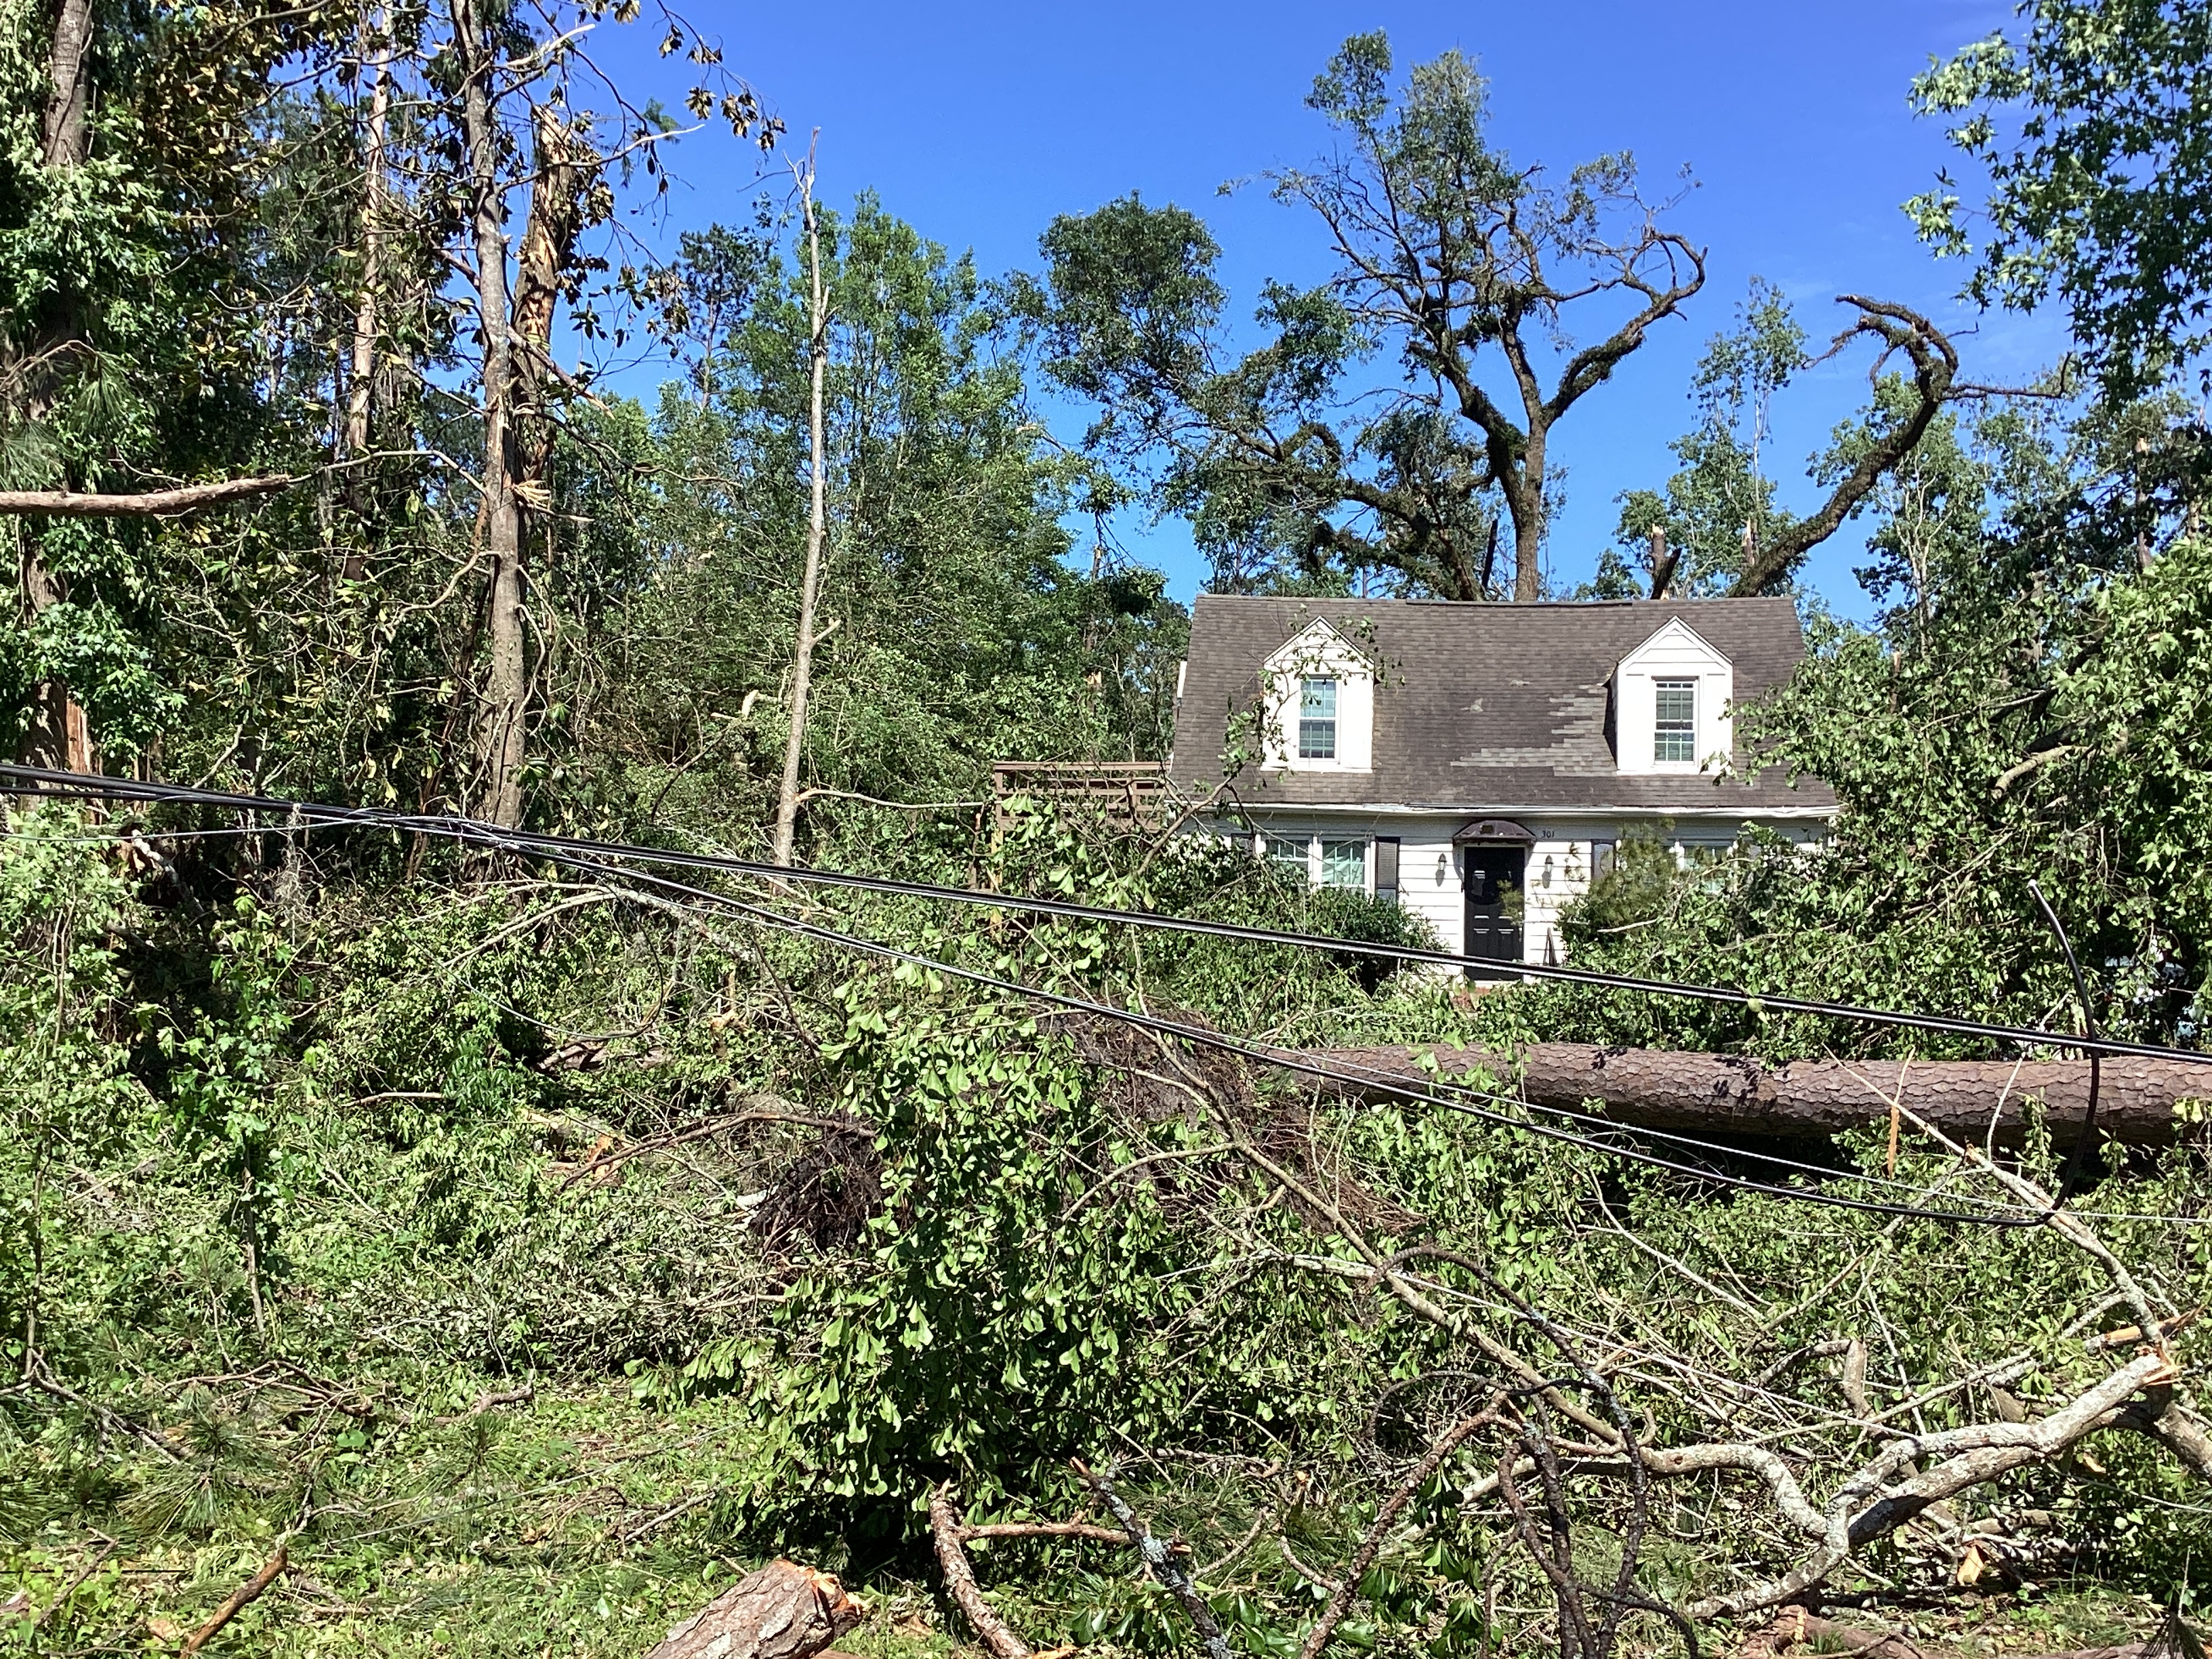 Low-end EF2 tree damage from the 1st Tallahassee tornado.